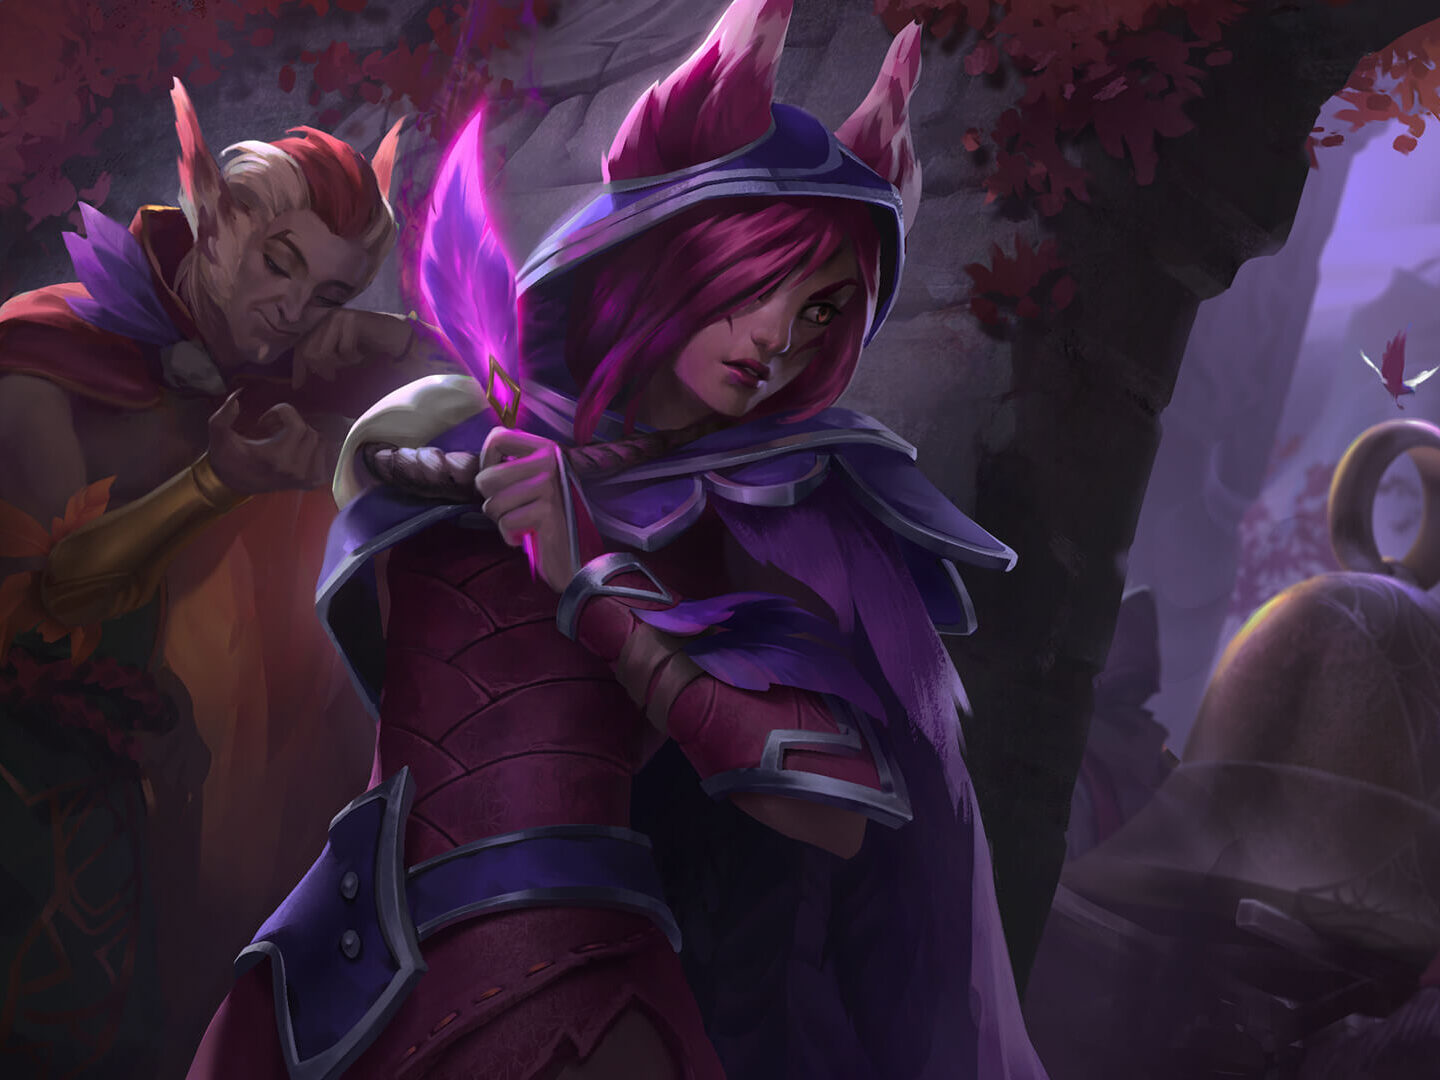 Riot MMO Factions Lhotlan members Xayah and Rakan working together in the forest